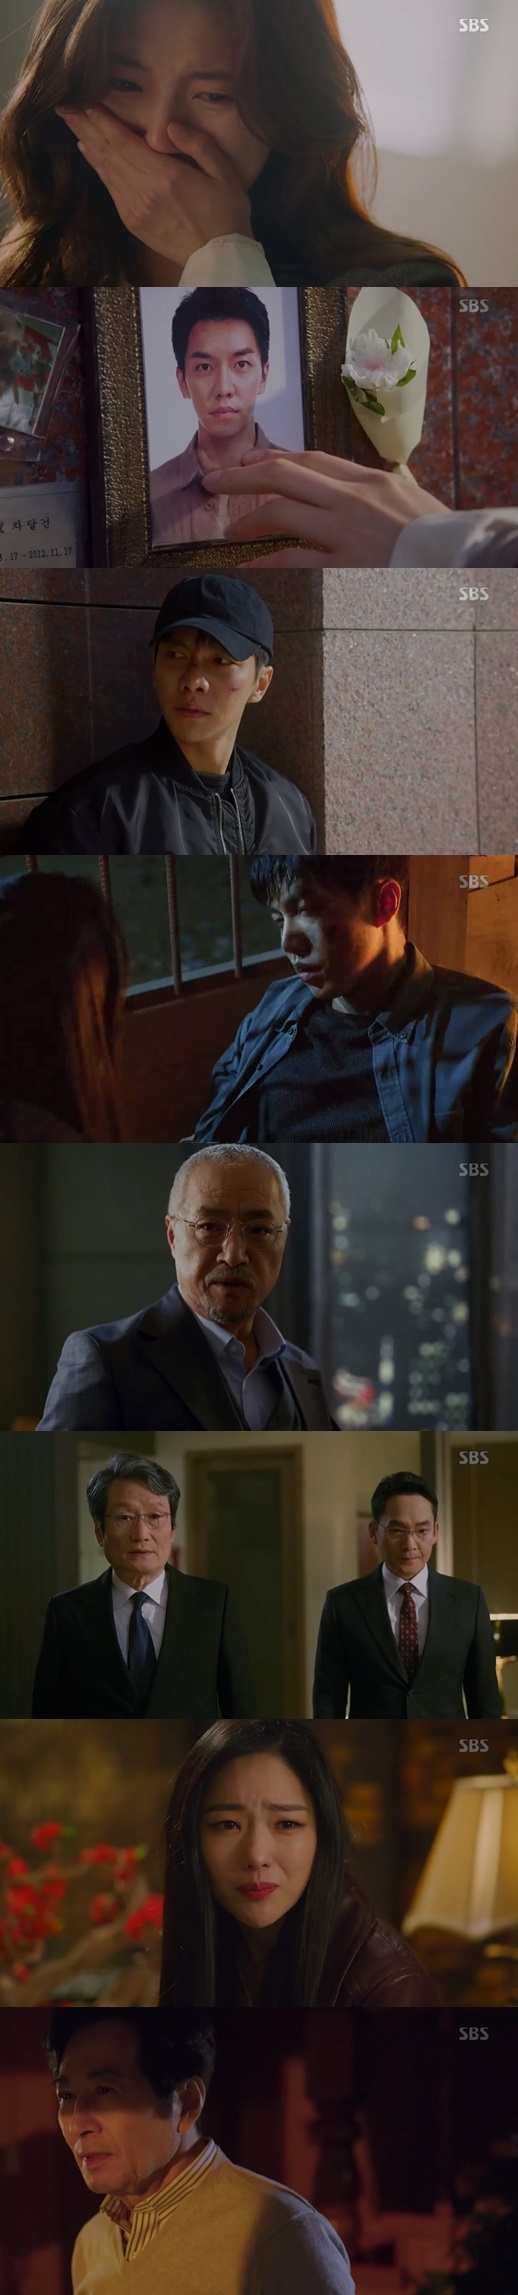 Vagabond Actor Lee Seung-gi was destined to kill Bae Suzy in the play.In the final episode of SBS gilt drama Vagabond (played by Jang Young-chul, directed by Yoo In-sik), which was broadcast on the 23rd night, the appearance of Gohari (Bae Suzy), who became a lobbyist with Cha Dal-gun (Lee Seung-gi) and Jessica Lee (Moon Jeong-hee), who became mercenaries for revenge, was drawn.Jungkook (Baek Yoon-sik), who promised to uncover Chadal-gun and the truth, resigned from the presidency; Gohari headed to Chadal-guns house when he could not reach Chadal-gun.Kim Song Yuqi (Jang Hyuk-jin) was kidnapped in the room where the fingerprint of the chadalgun came out and the chadalgun received Misunderstood as Kim Song Yuqi kidnapper.Kim Song Yuqi was found dead.The other body was not identified, but the blood type was O. He remembered the chadalgun.Ki Tae-woong (Shin Sung-rok) also thought that the body was a car, and various evidence from the fire site pointed to the car.The confessional, who thought that Cha Dal-gun was dead, was crying, but Cha Dal-gun was crying together with this confession.The Chadalgun, tied up by Prince Edward Island Park (Lee Kyung-young), managed to escape just before the detonation of the waste warehouse.Lily (Park Ain), who was watching the situation, helped rescue and in the process her colleague died and received Missunderstood as the body of Chadalgan.Hong Soon-jo (Moon Sung-geun), who has been acting president, finally met with Prince Edward Island Park, a Samael.Prince Edward Island Park ordered the handling of the Dynamics contract and the change of ministry figures.When Hong Sun-jo did not comply, Prince Edward Island threatened to take the presidency and ordered the investigation to be concluded.Chadalgan, who was hiding with Lily, decided to enter the Black Sun, saying, I will go into the tiger oyster to catch the tiger.He decided to hire Lily for help and asked for money by visiting Jungkook, and Jungkook said, I think I will live even if I am hit.So I give you money, he said, and he was willing to give me the funding line.Jessica Lido heard from Lily that Samael and Prince Edward Island Park were the same person; she was anxious to find out that someone was watching her.In fact, Jerome (Jew Tae-oh) was a prison guard in the prison where he was imprisoned. Jessica Lee asked the NIS for help, and Ko Hae-ri himself infiltrated the prison.Jessica Lee and her meeting with the confession heard the identity of Prince Edward Island Park and made more revenge.At this time, the confession said that Prince Edward Island Park came in with a vengeance against Jessica Lee, who killed Chadalgan when he came to him.But Prince Edward Island Park was not easily trusted, and Ko Hae-ri deliberately stabbed Jessica Lee.Jessica Li also asked Prince Edward Island Park to visit and told him to take over after revealing John and Marks corruption.Prince Edward Island Park, who believed in Jessica Lee, ordered her to be extradited to United States of America.Gohari, who had been struggling with memories with Chadalgun, was later out of prison and Jessica Lee, who was released thanks to repatriation, was waiting for him in the car.Jessica Lee suggested that Gohari go to United States of America together and be a lobbyist, and Gohari accepted it.Chadalgan became a mercenary of the Black Sun and served in the Key Lia Kingdom.But when he found out that Jerome was the one who ordered the recovery of biochemical weapons, he killed all his colleagues and remained alone and waited for Jerome.Jerome, who was attacked by biochemical weapons, said that the secret organization was Axis and the target was Silia to get the antidote, but Chadalgan broke the antidote and said, I remember going to hell.My nephews name is Hun. Hong Sun-jos approval rating for the presidential race has fallen.The KeyLia crude oil project is the last variable, he told Prince Edward Island Park, and he said he had contact with a new lobbyist in his royal family.The lobbyist was a confessional. The fancy confession headed for the palace. The new mission was on standby.When Chadal-gun saw the confession from the car, he was shocked and refused to shoot him, so his colleague tried to kill him instead, and Chadal-gun turned his gun and killed his colleague and shed tears.